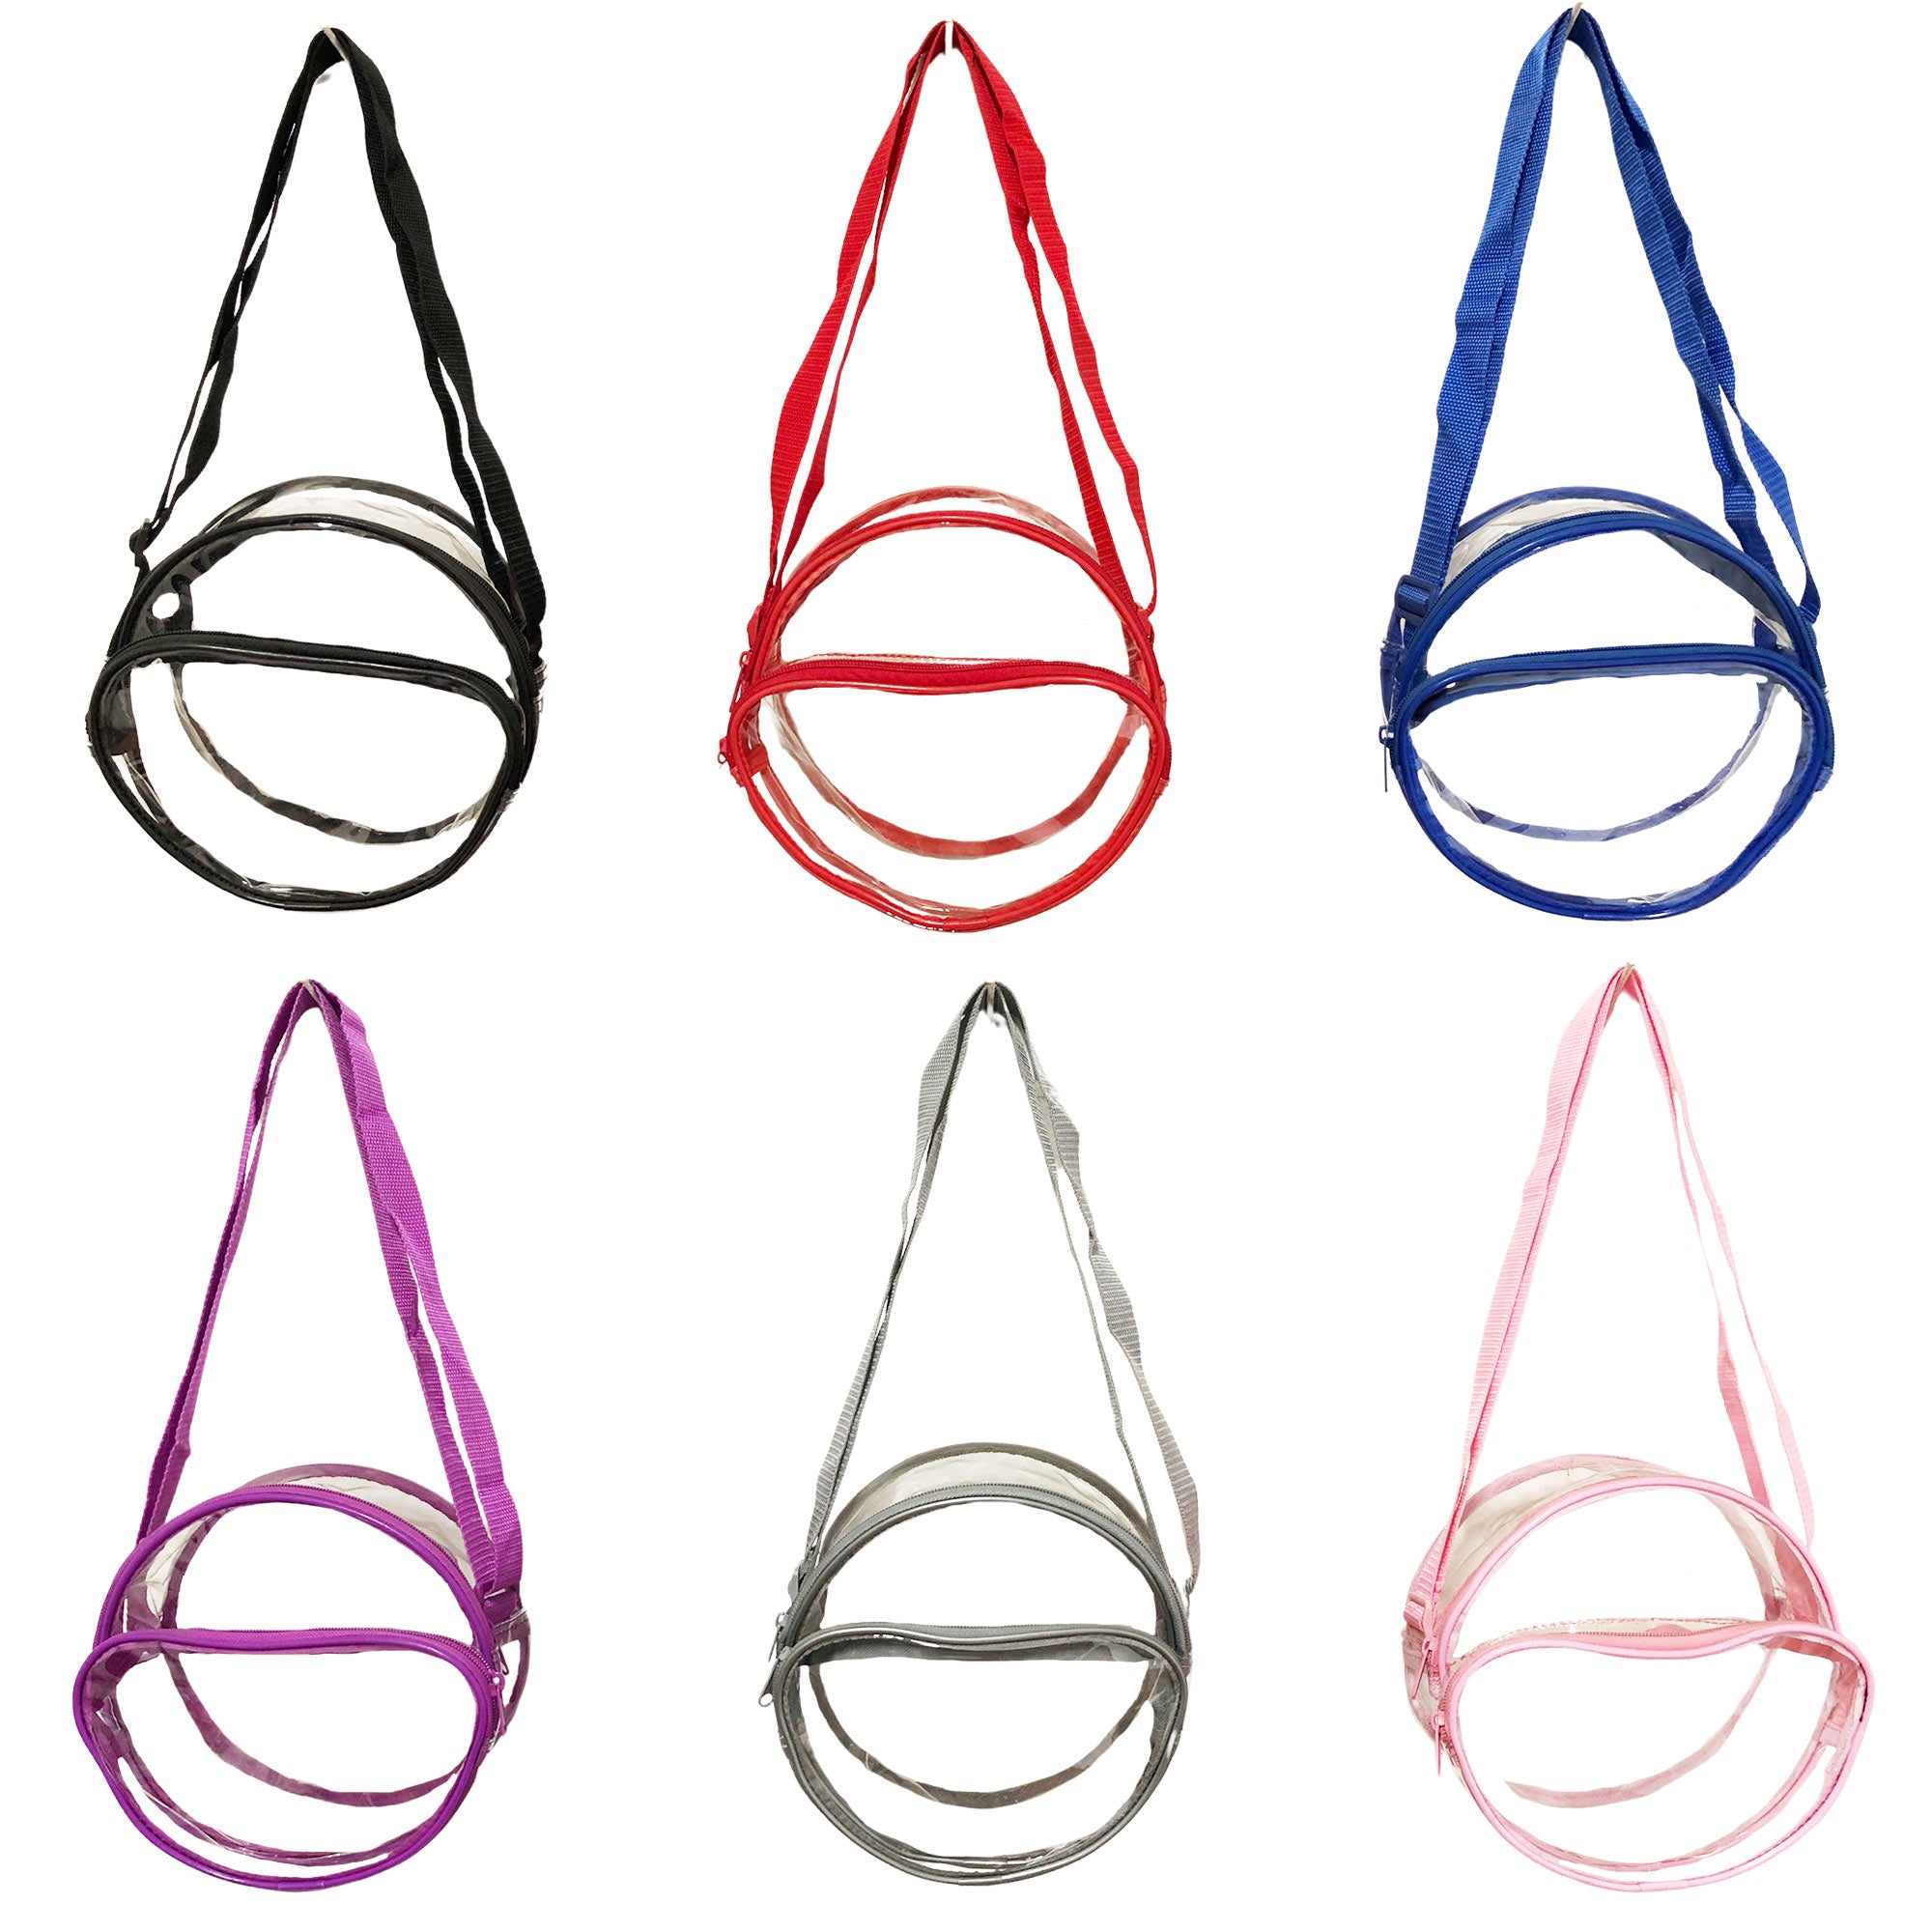 CLEARANCE WHOLESALE 8" CLEAR ROUND CROSSBODY (CASE OF 48- $2.00 / PIECE) Wholesale Transparent Bag in Assorted Colors SKU: 8-ROUND-48